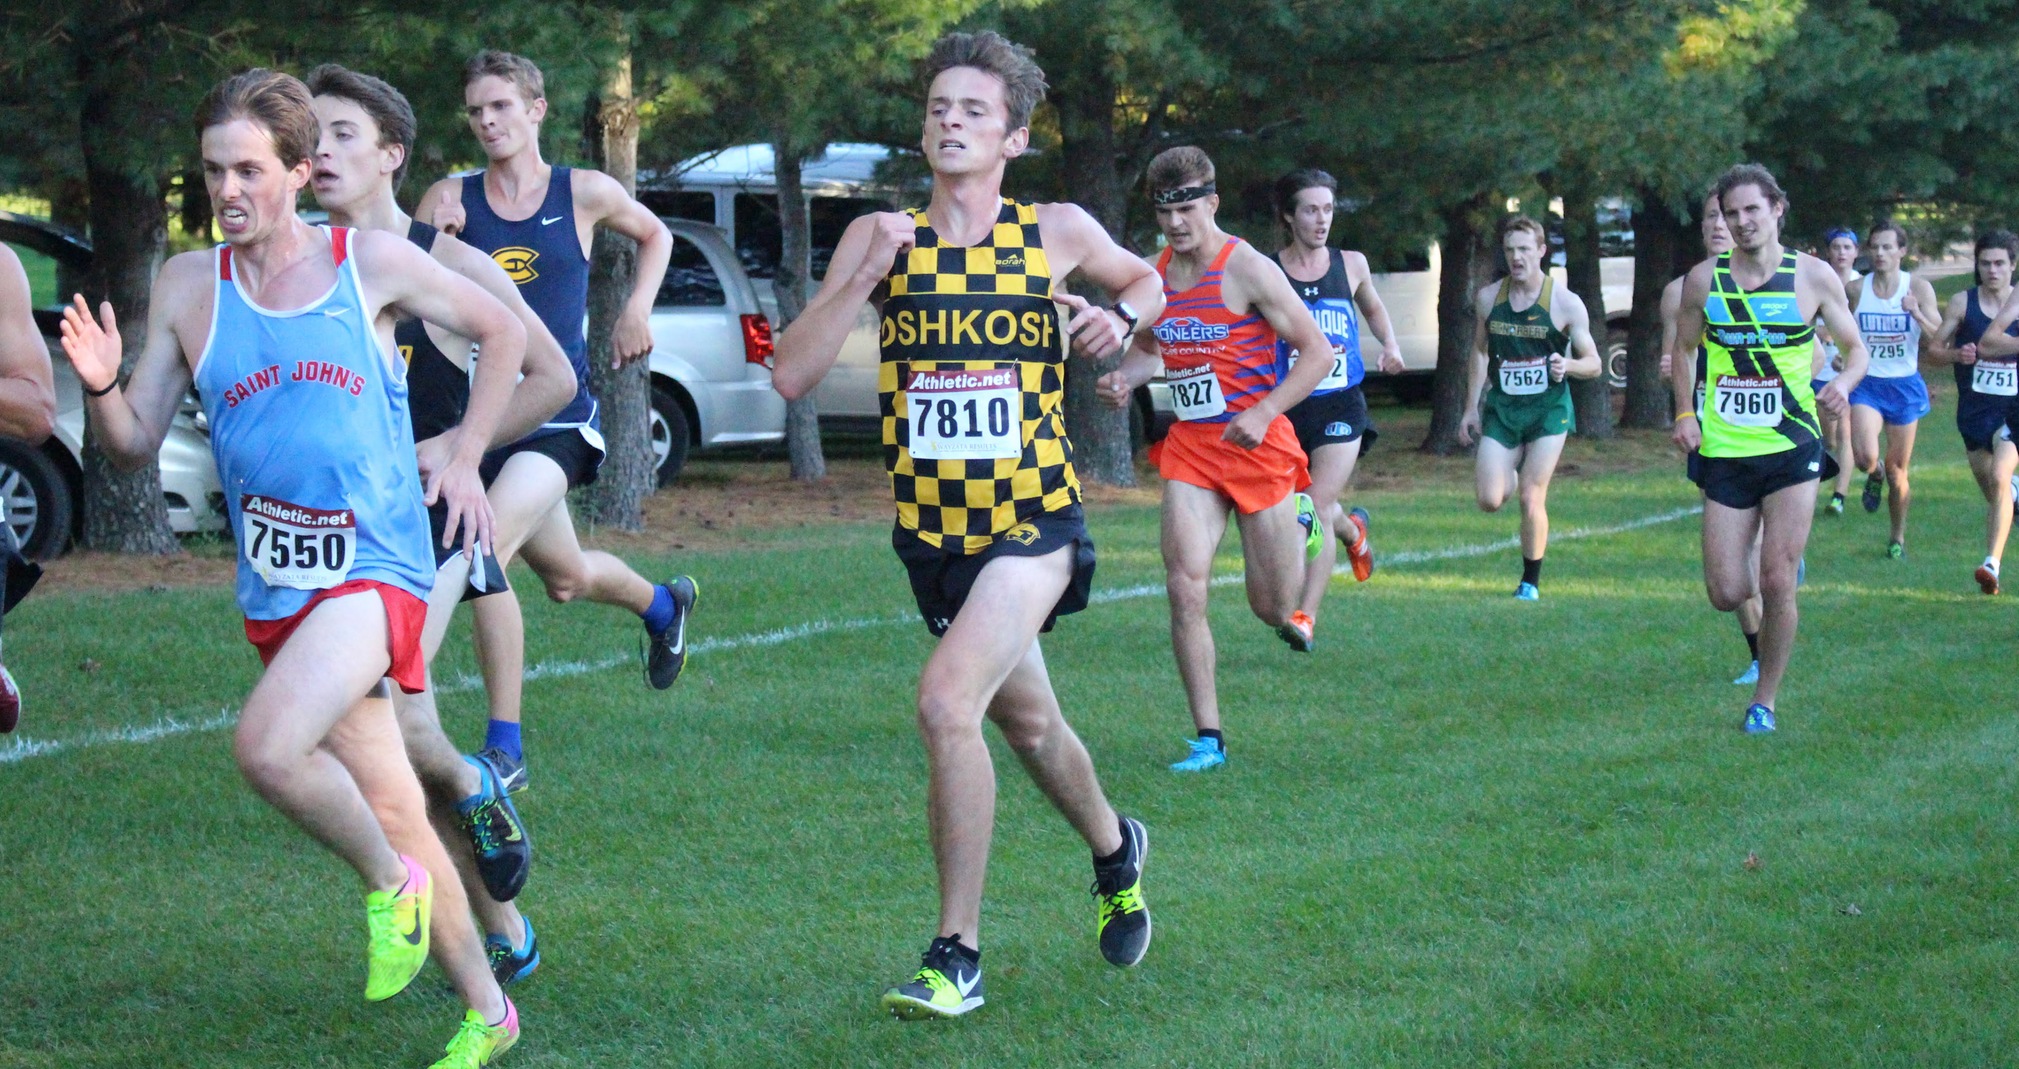 The Titans were led at the UW-Oshkosh Open by Parker Scheld's seventh-place run.